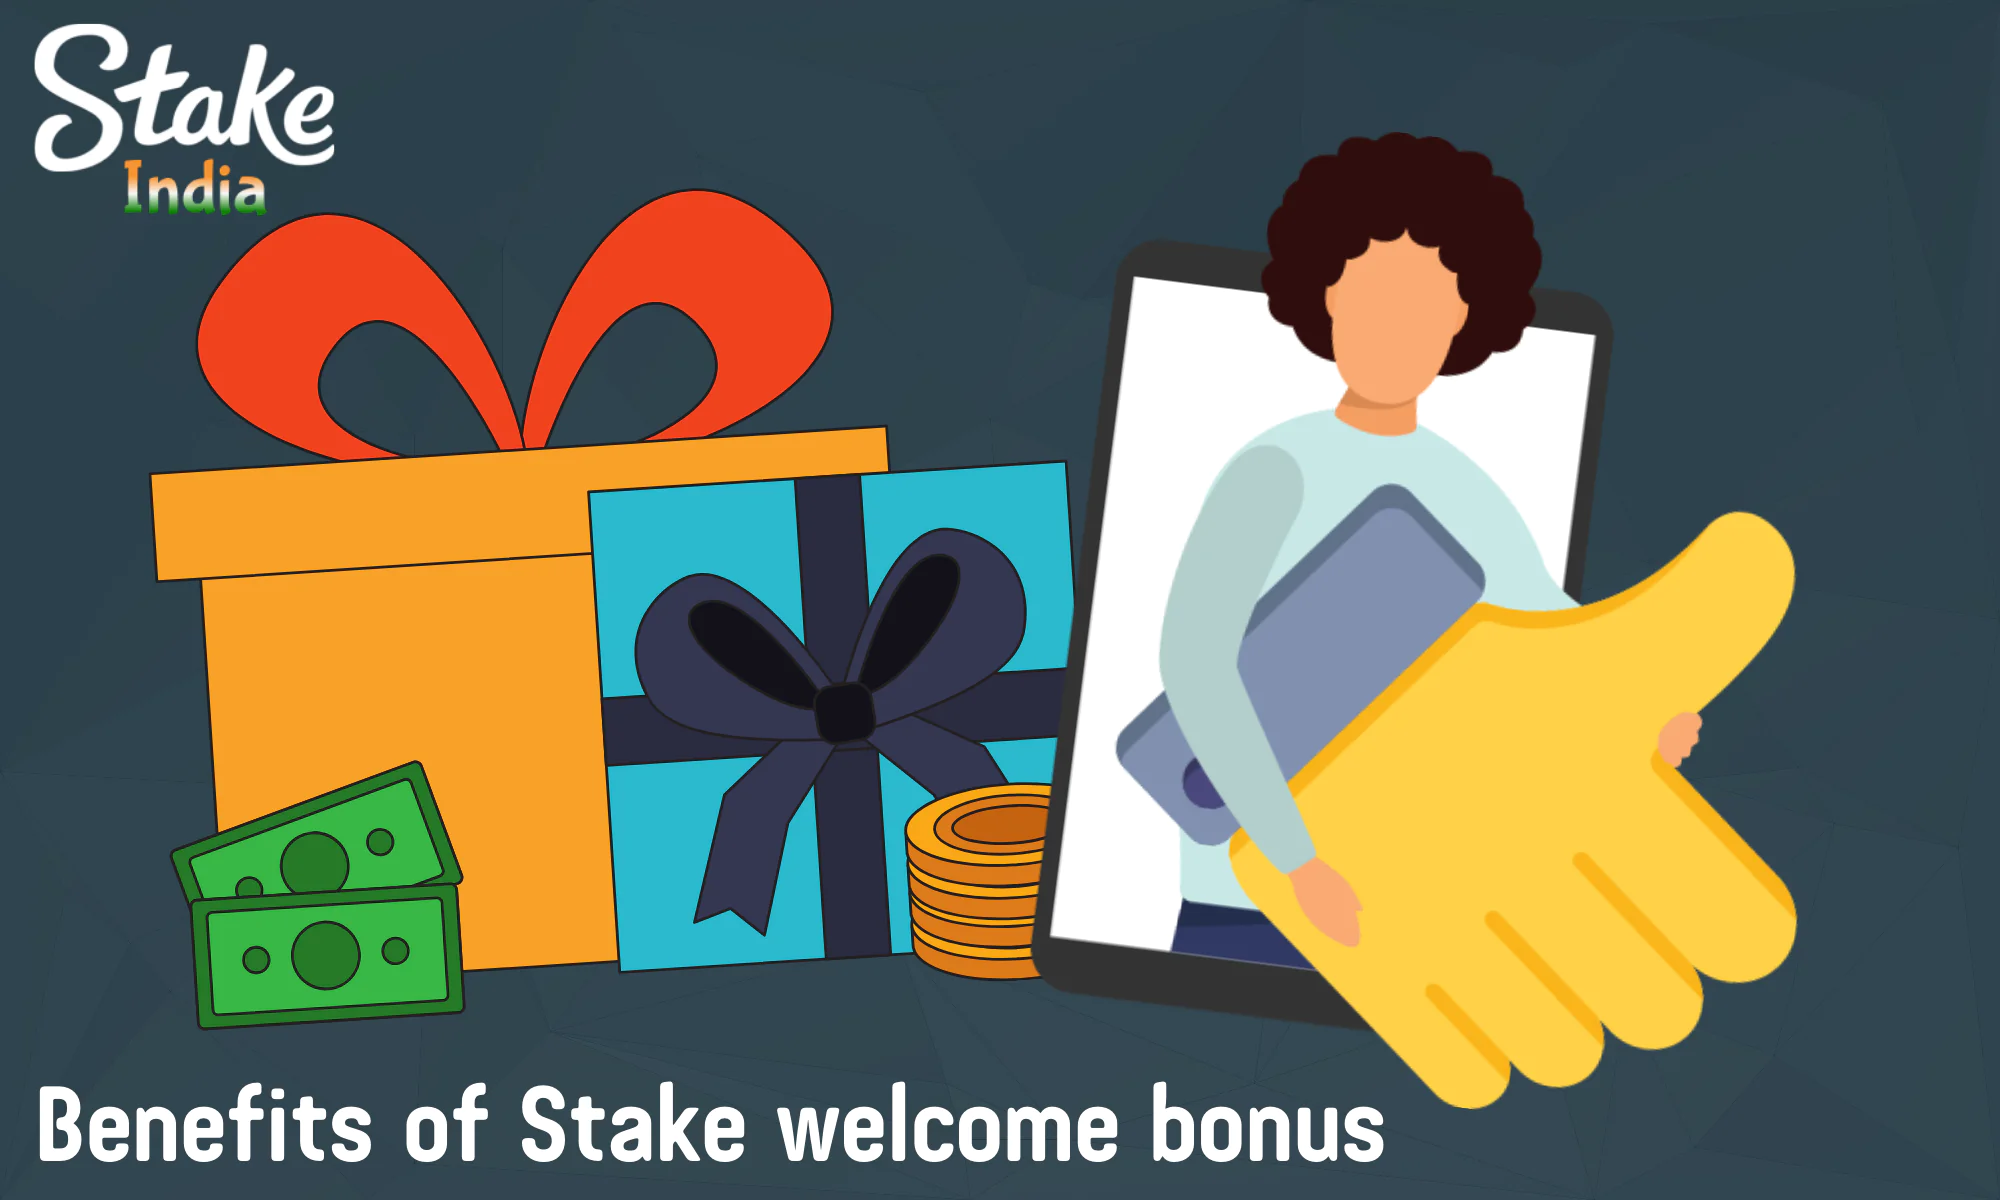 Stake offers good benefits for new players with welcome bonuses